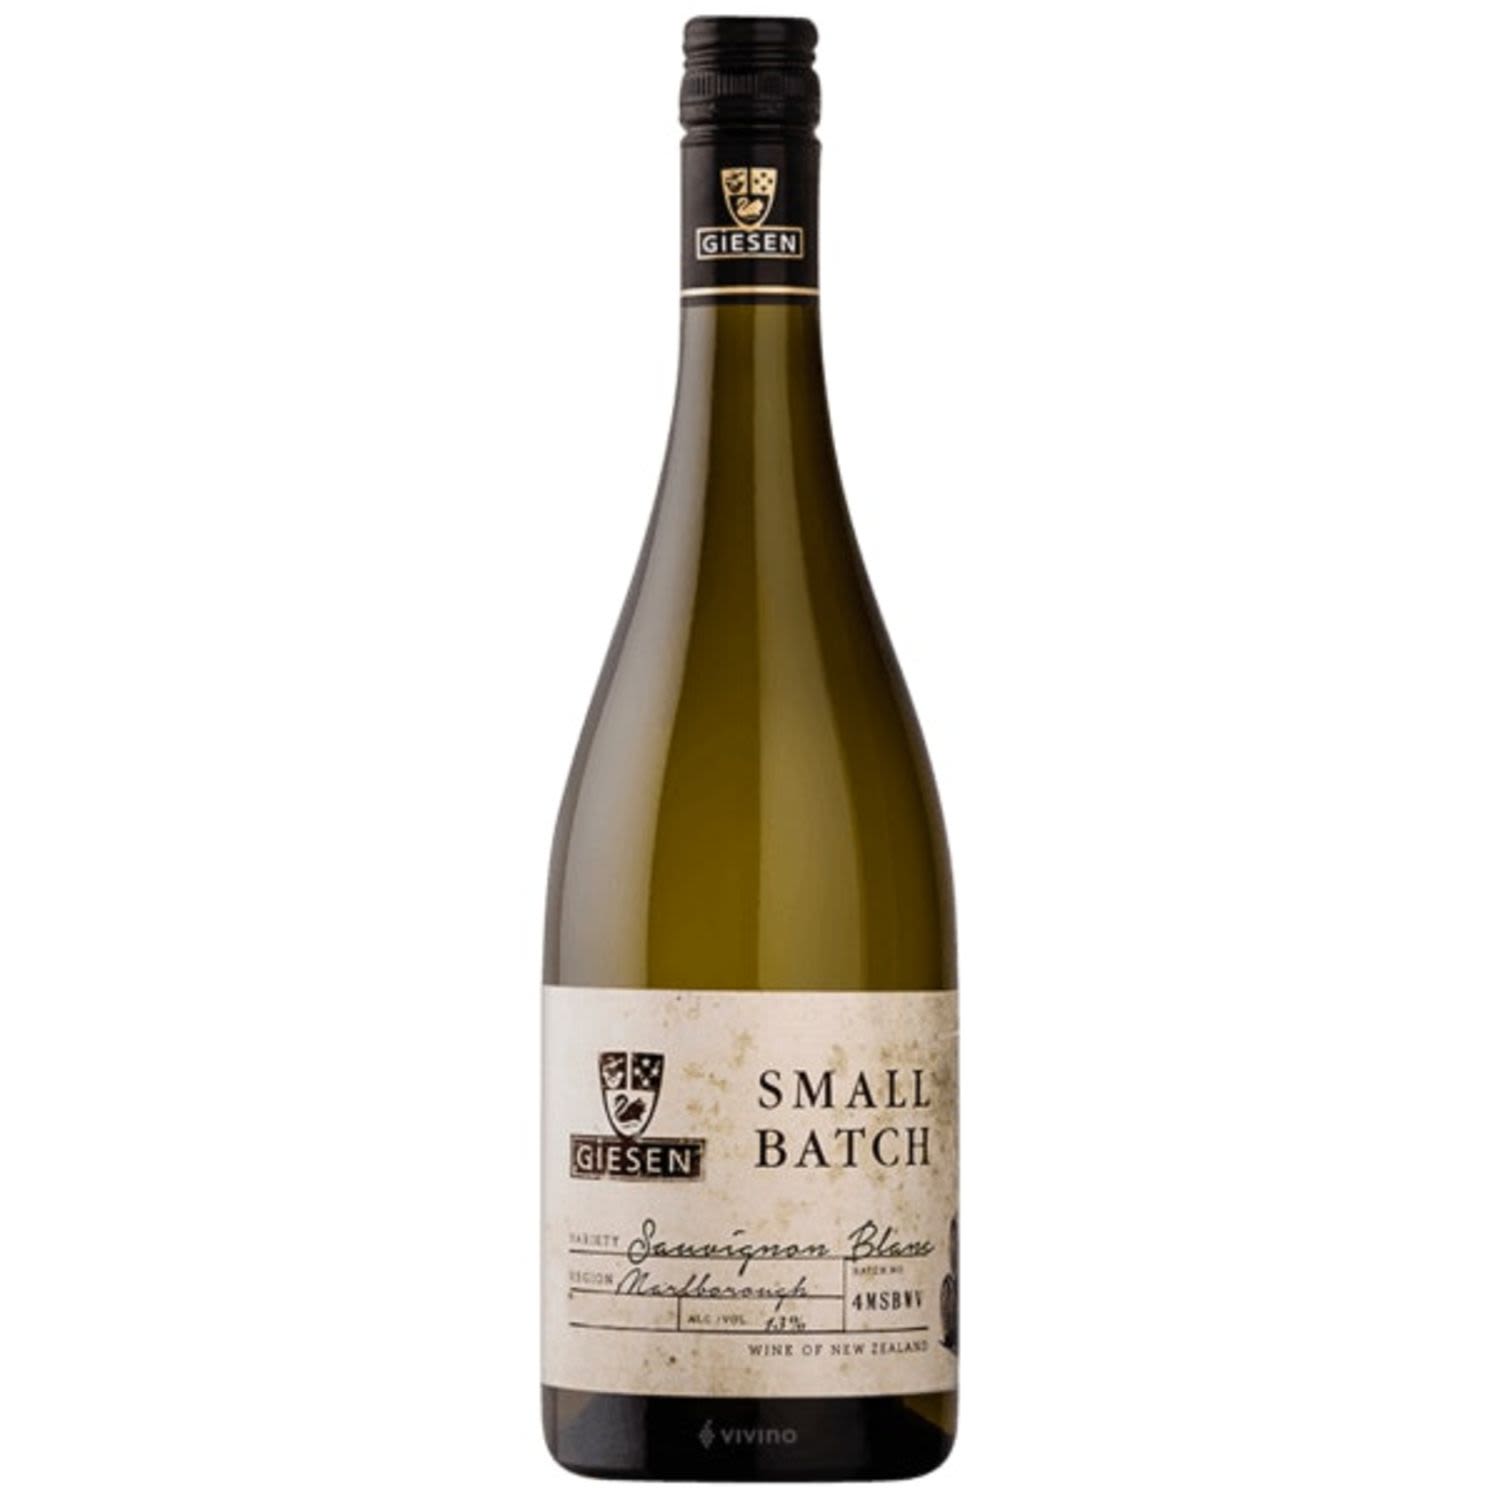 Sauvignon Blanc fruit from Awatere gives tropical aromatics such as grilled pineapple & dry herbs. 5-10% of the wine is aged in a mix of French & German oak barrels, sizes 300L – 1,000L. This gives weight, texture & ageability to the Sauvignon Blanc. Aged on lees for 3 to 4 months to give lovely mouth-feel.<br /> <br />Alcohol Volume: 13.00%<br /><br />Pack Format: Bottle<br /><br />Standard Drinks: 8</br /><br />Pack Type: Bottle<br /><br />Country of Origin: New Zealand<br /><br />Region: Marlborough<br /><br />Vintage: '2018<br />